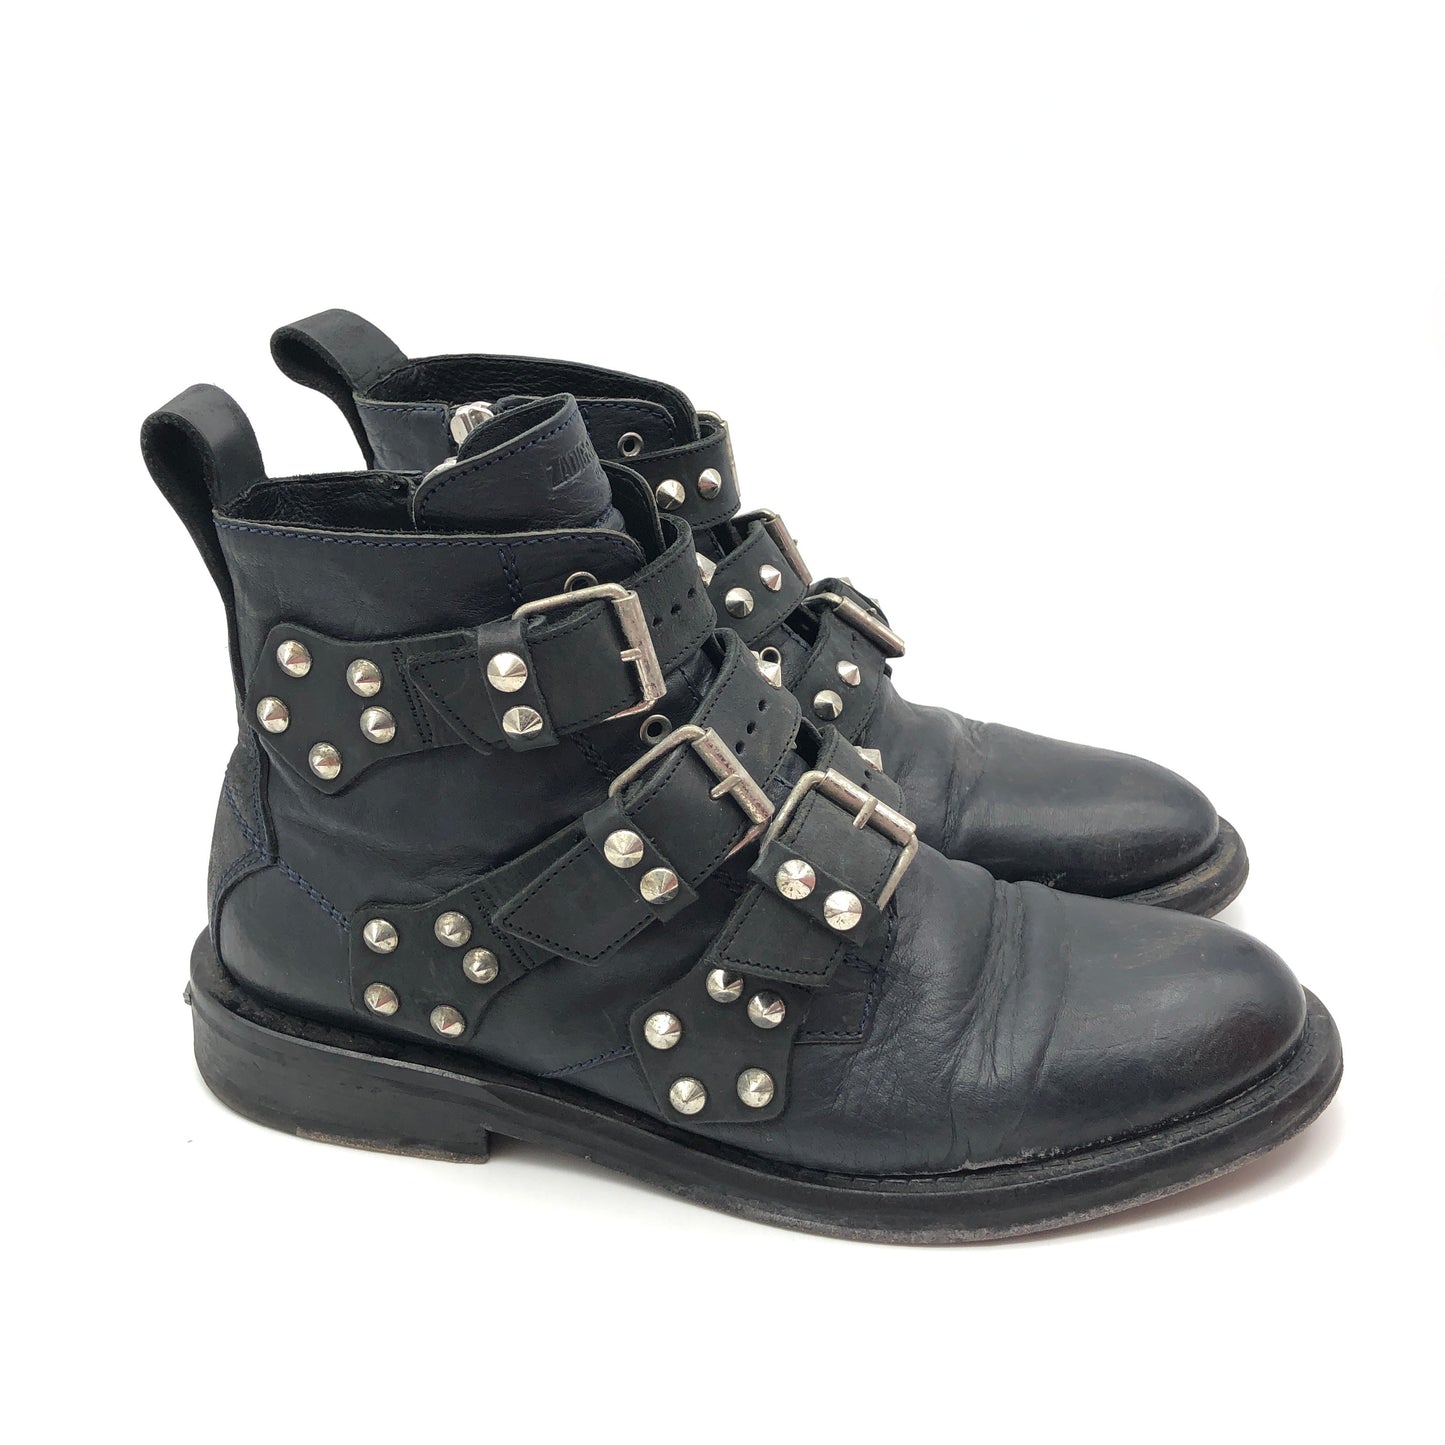 Boots Designer By Zadig And Voltaire  Size: 10.5